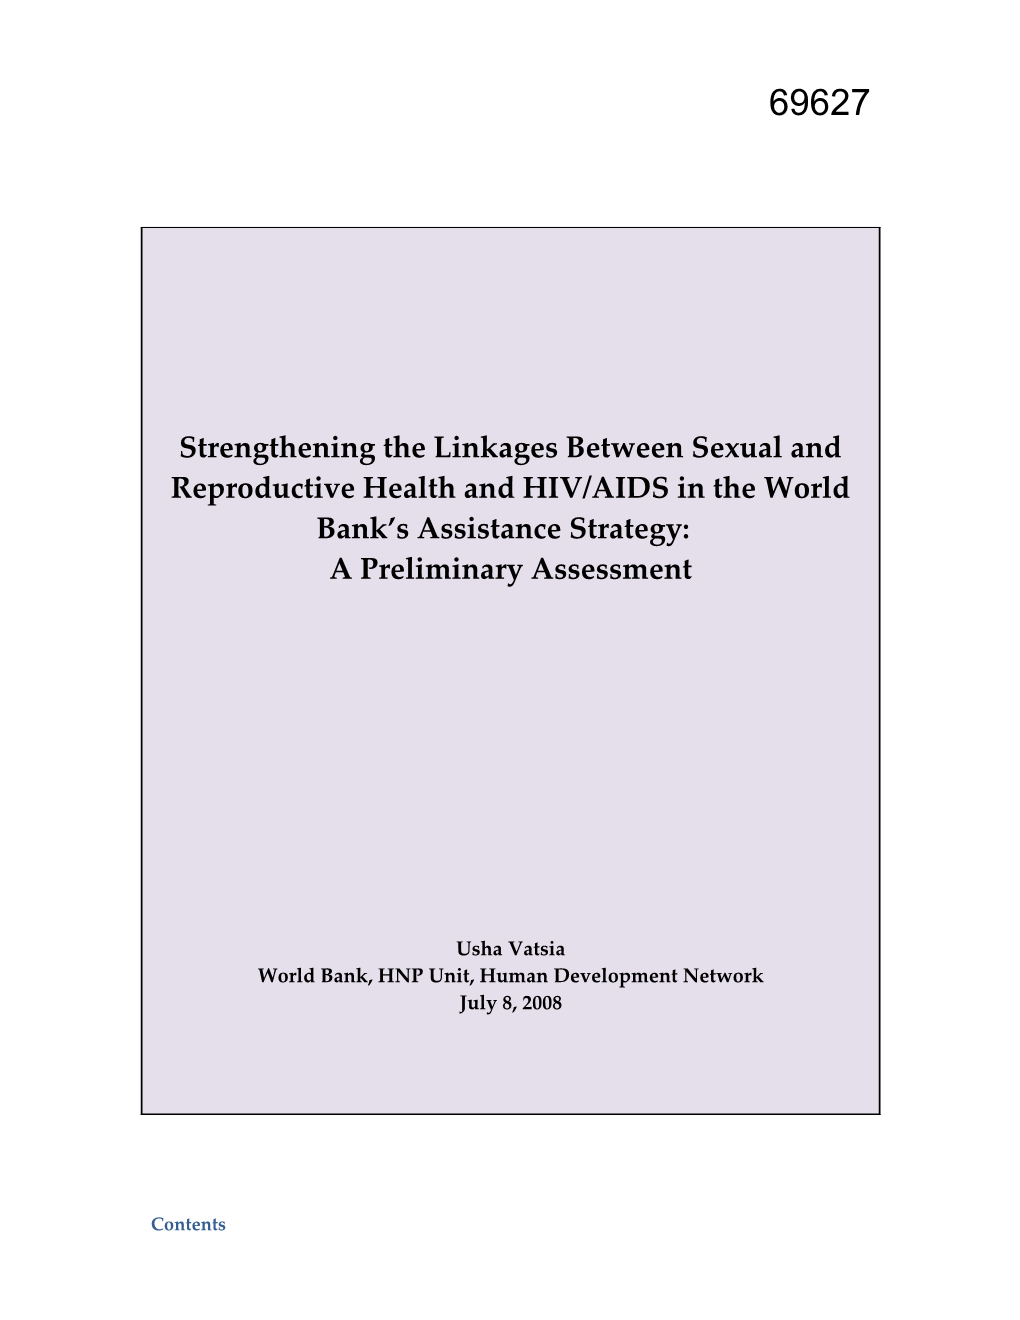 Strengthening HIV and SRH Linkages